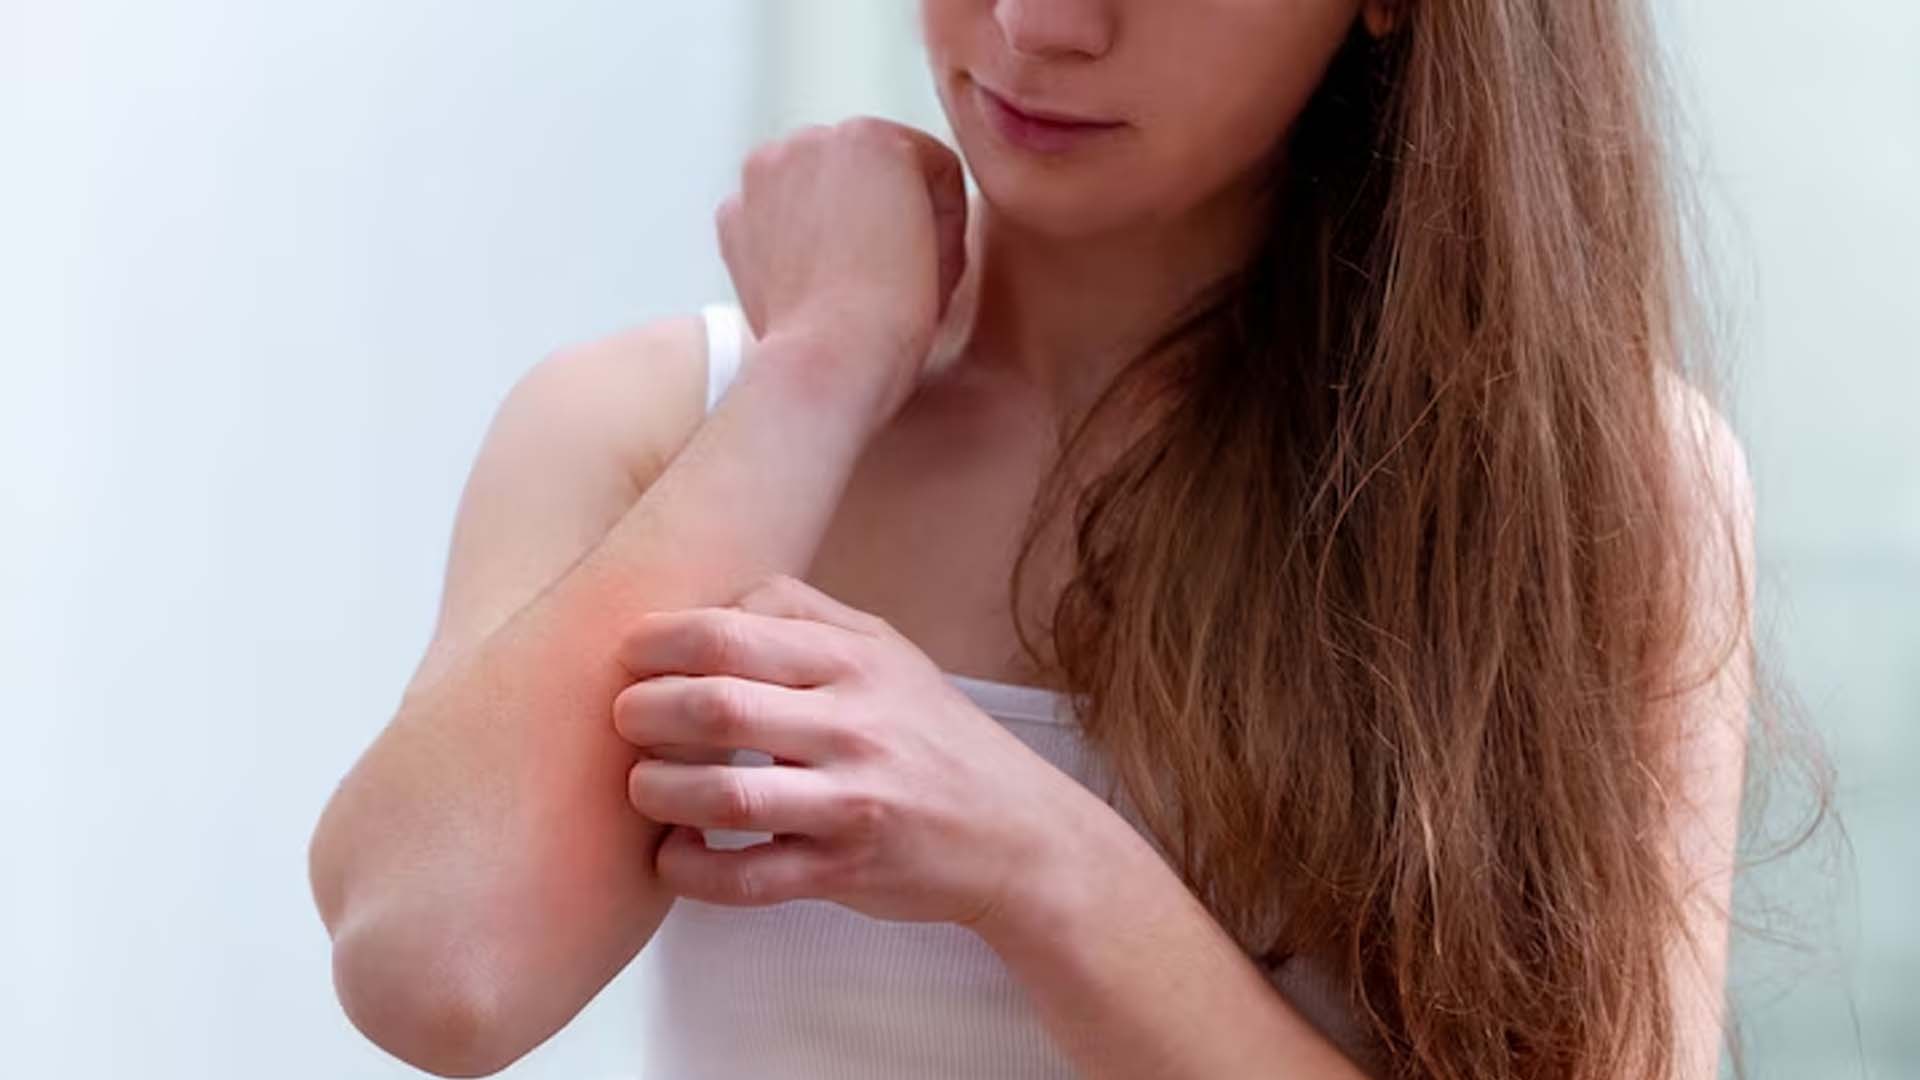 What Cancer Can Cause Itchy Skin?